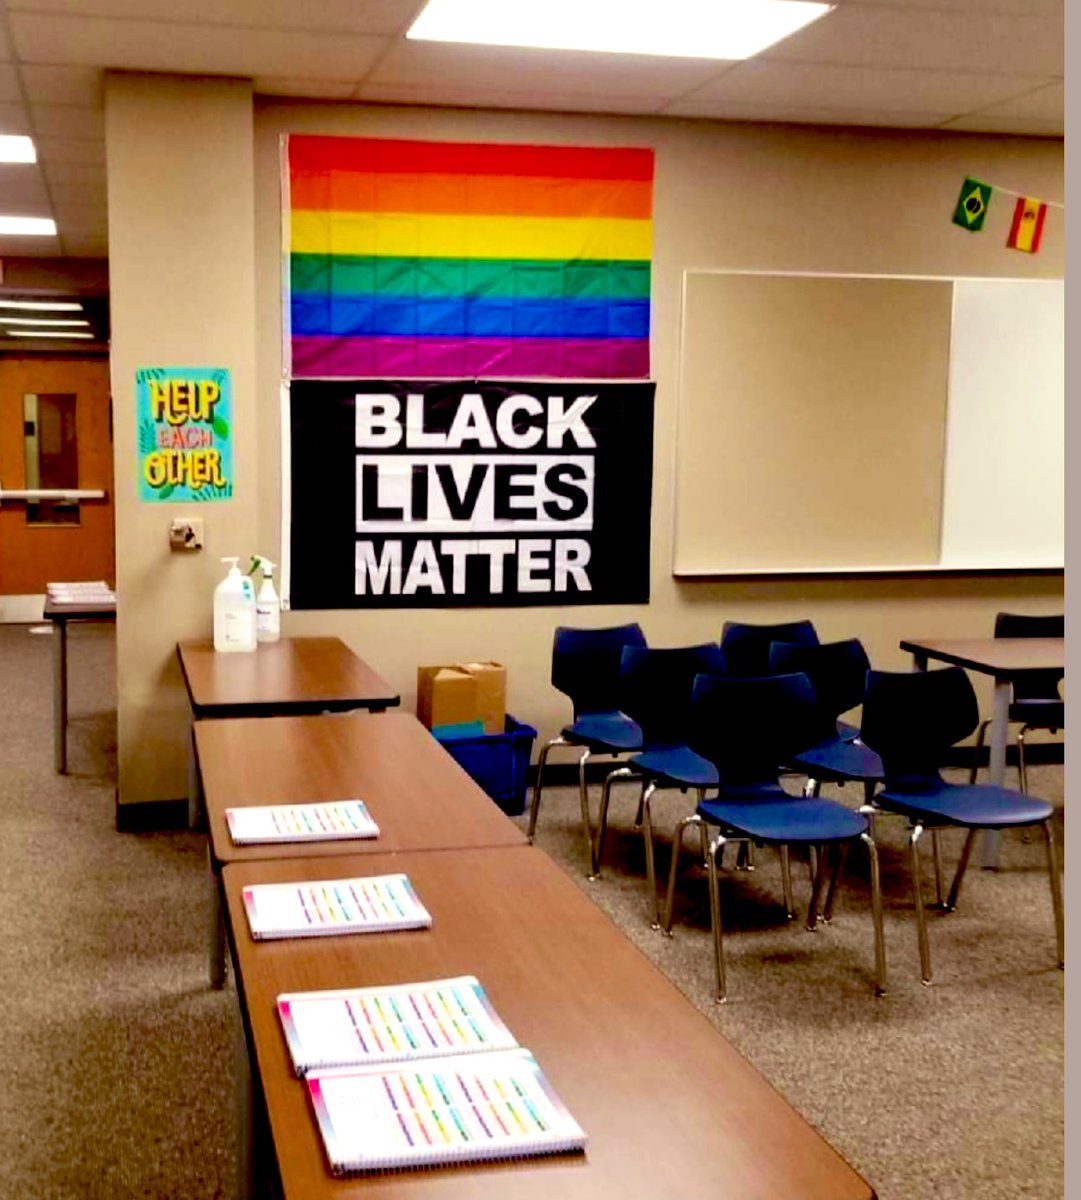 Do you agree that BLM and Pride Flags should be BANNED from classrooms? YES or NO? If YES, I will follow you back! 🇺🇸